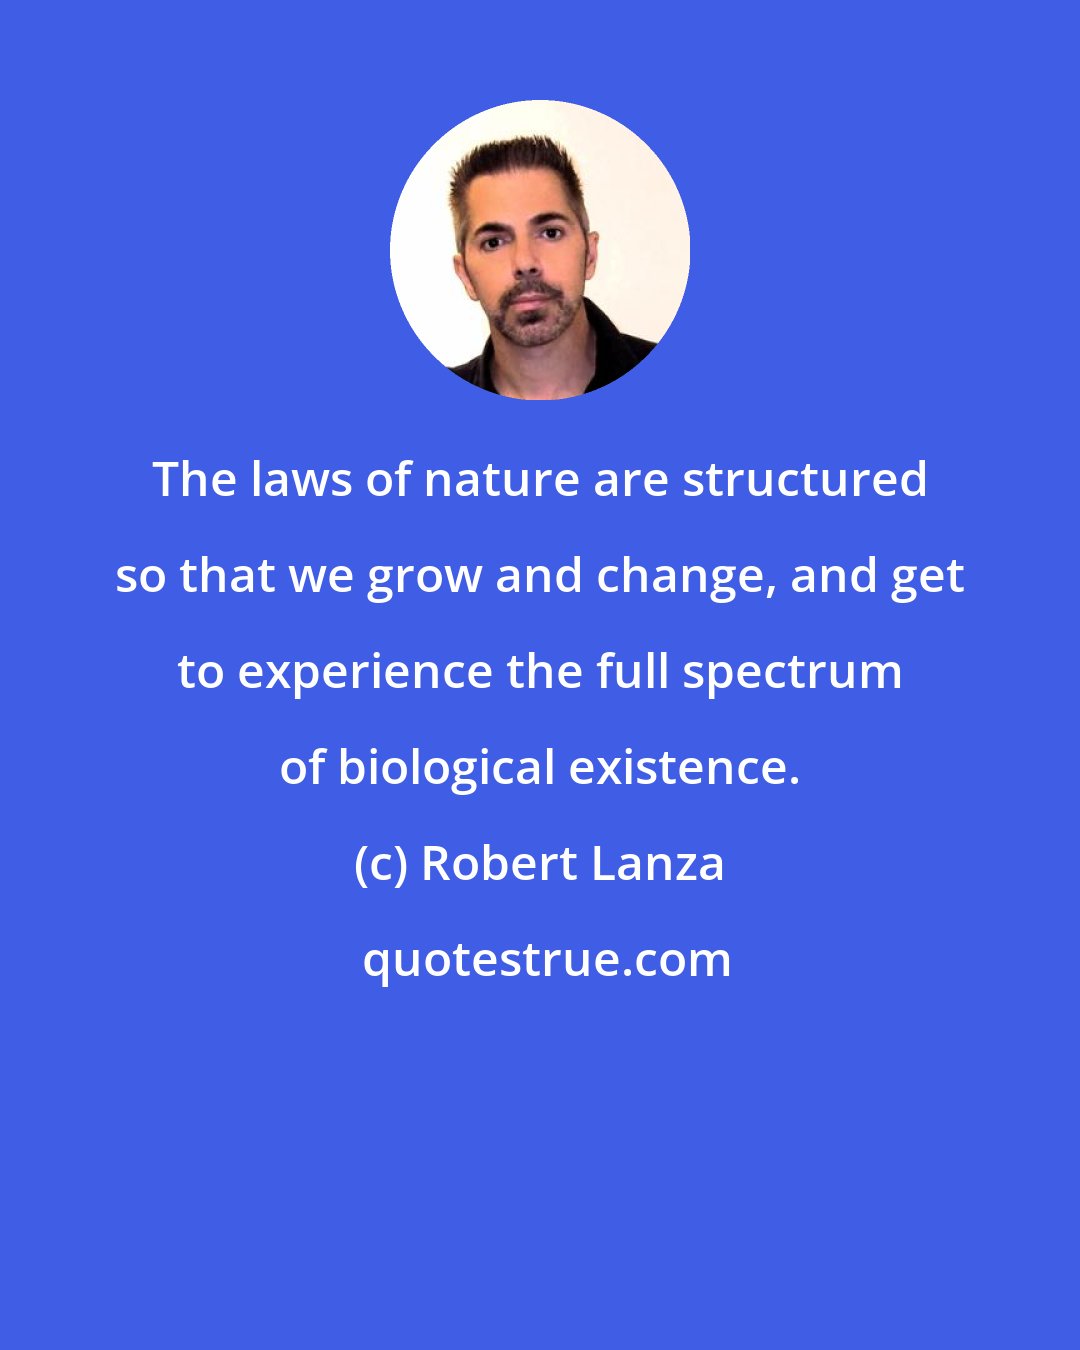 Robert Lanza: The laws of nature are structured so that we grow and change, and get to experience the full spectrum of biological existence.